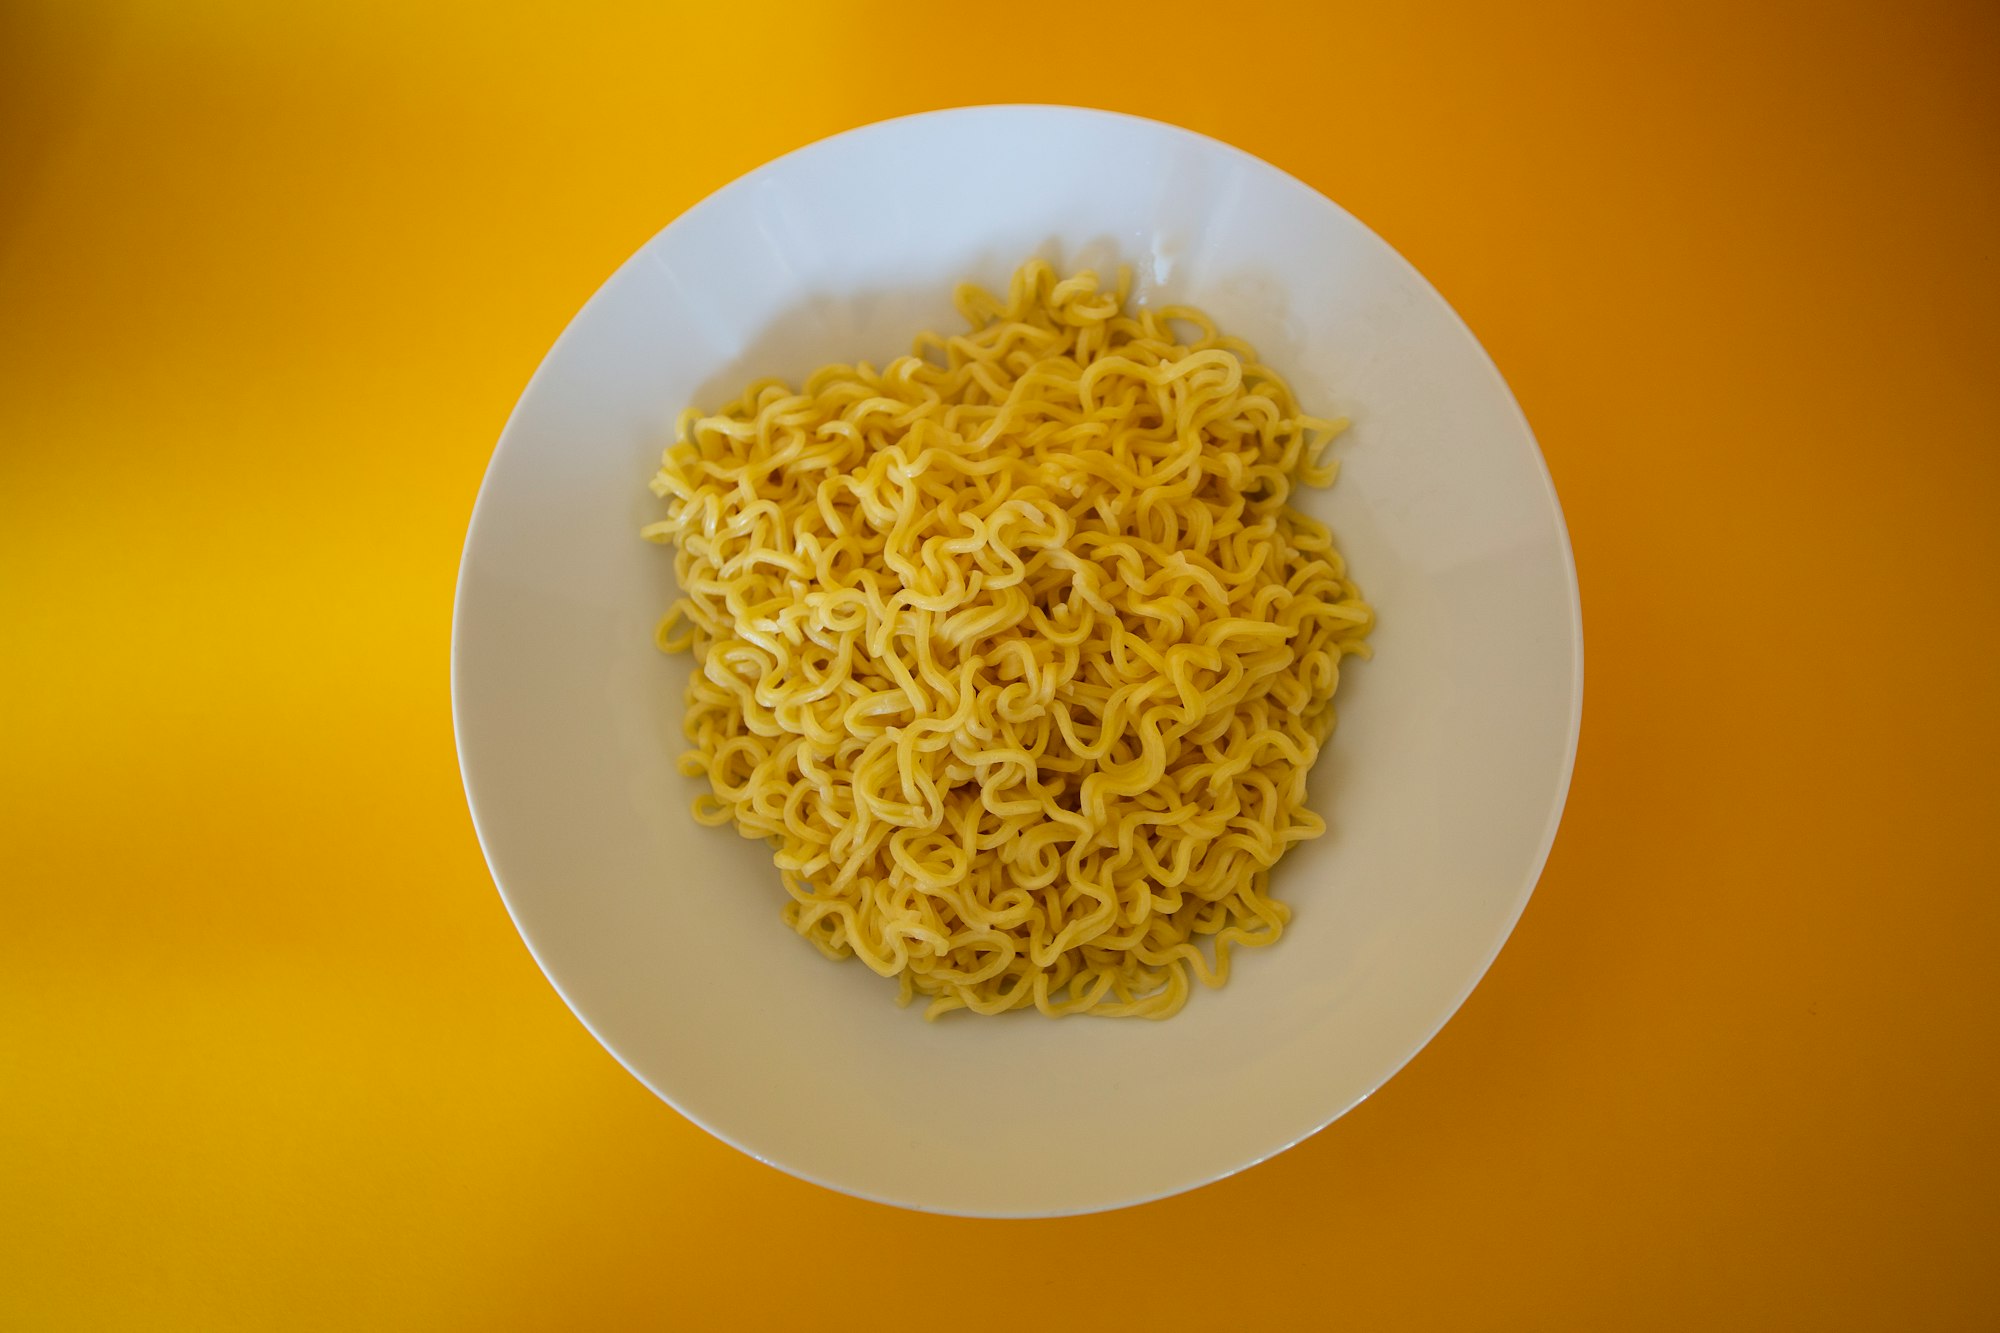 Certain brands of Indomie noodles not fit for human consumption, warns COMESA